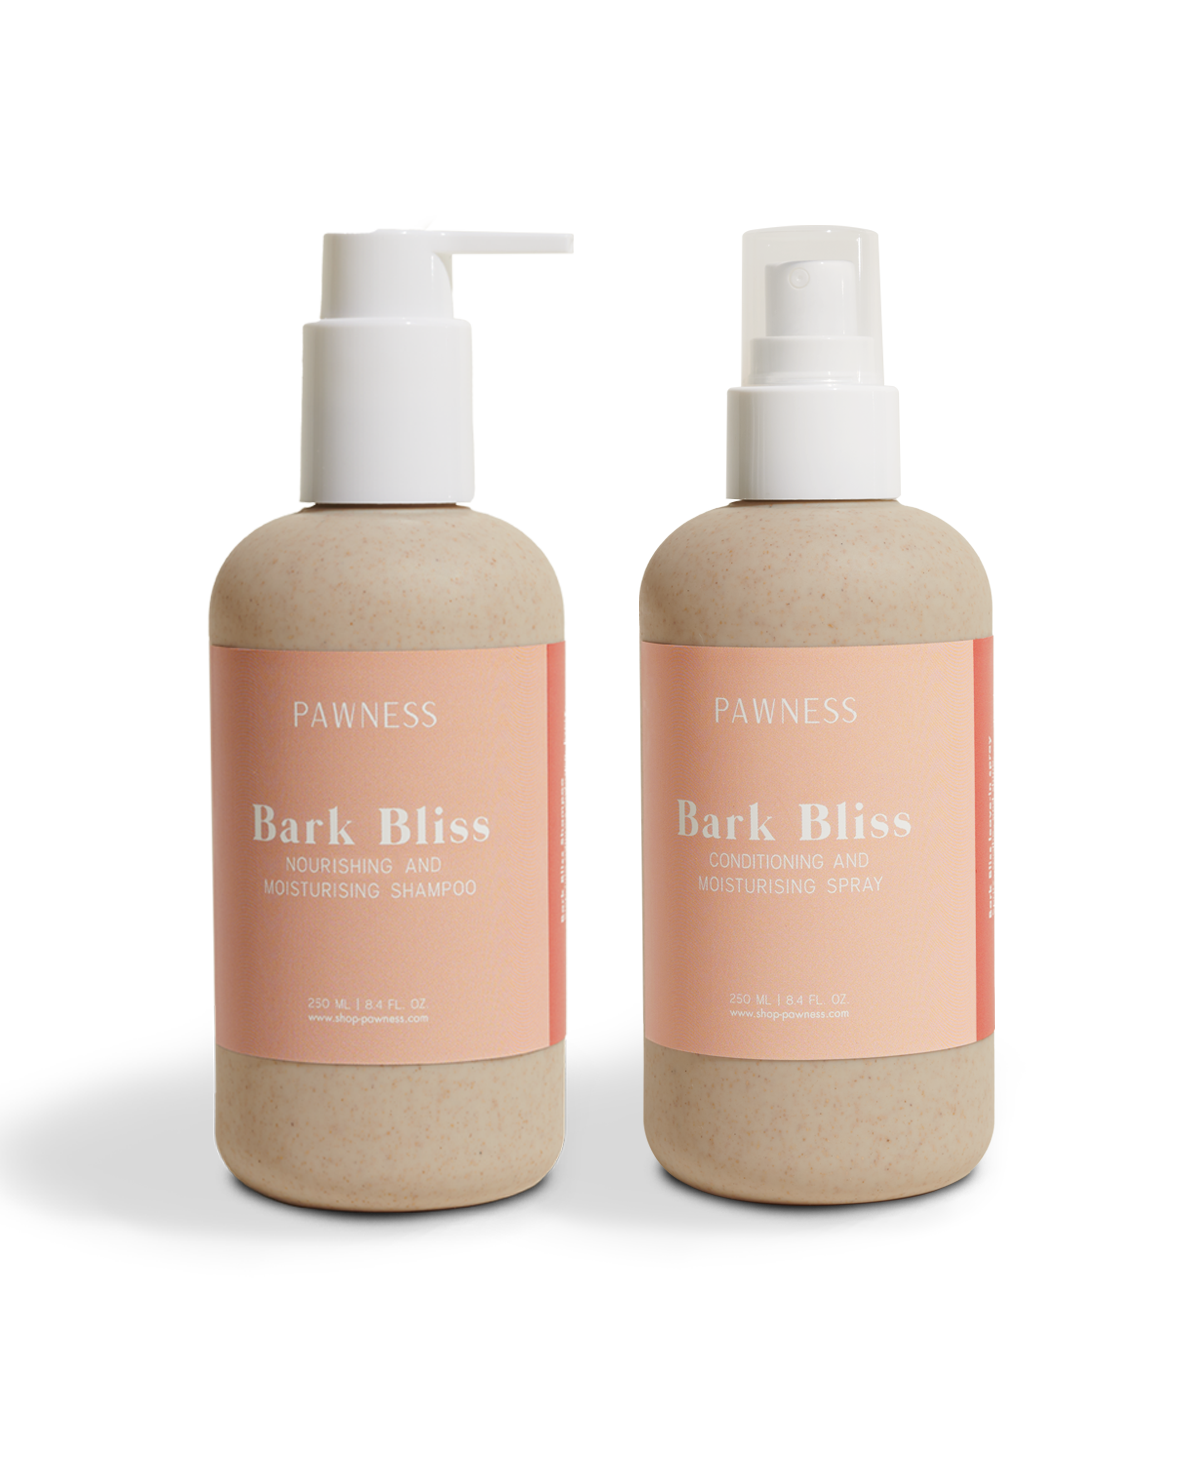 Two bottles of Back and Bliss body wash, one lavender scented and one eucalyptus scented.